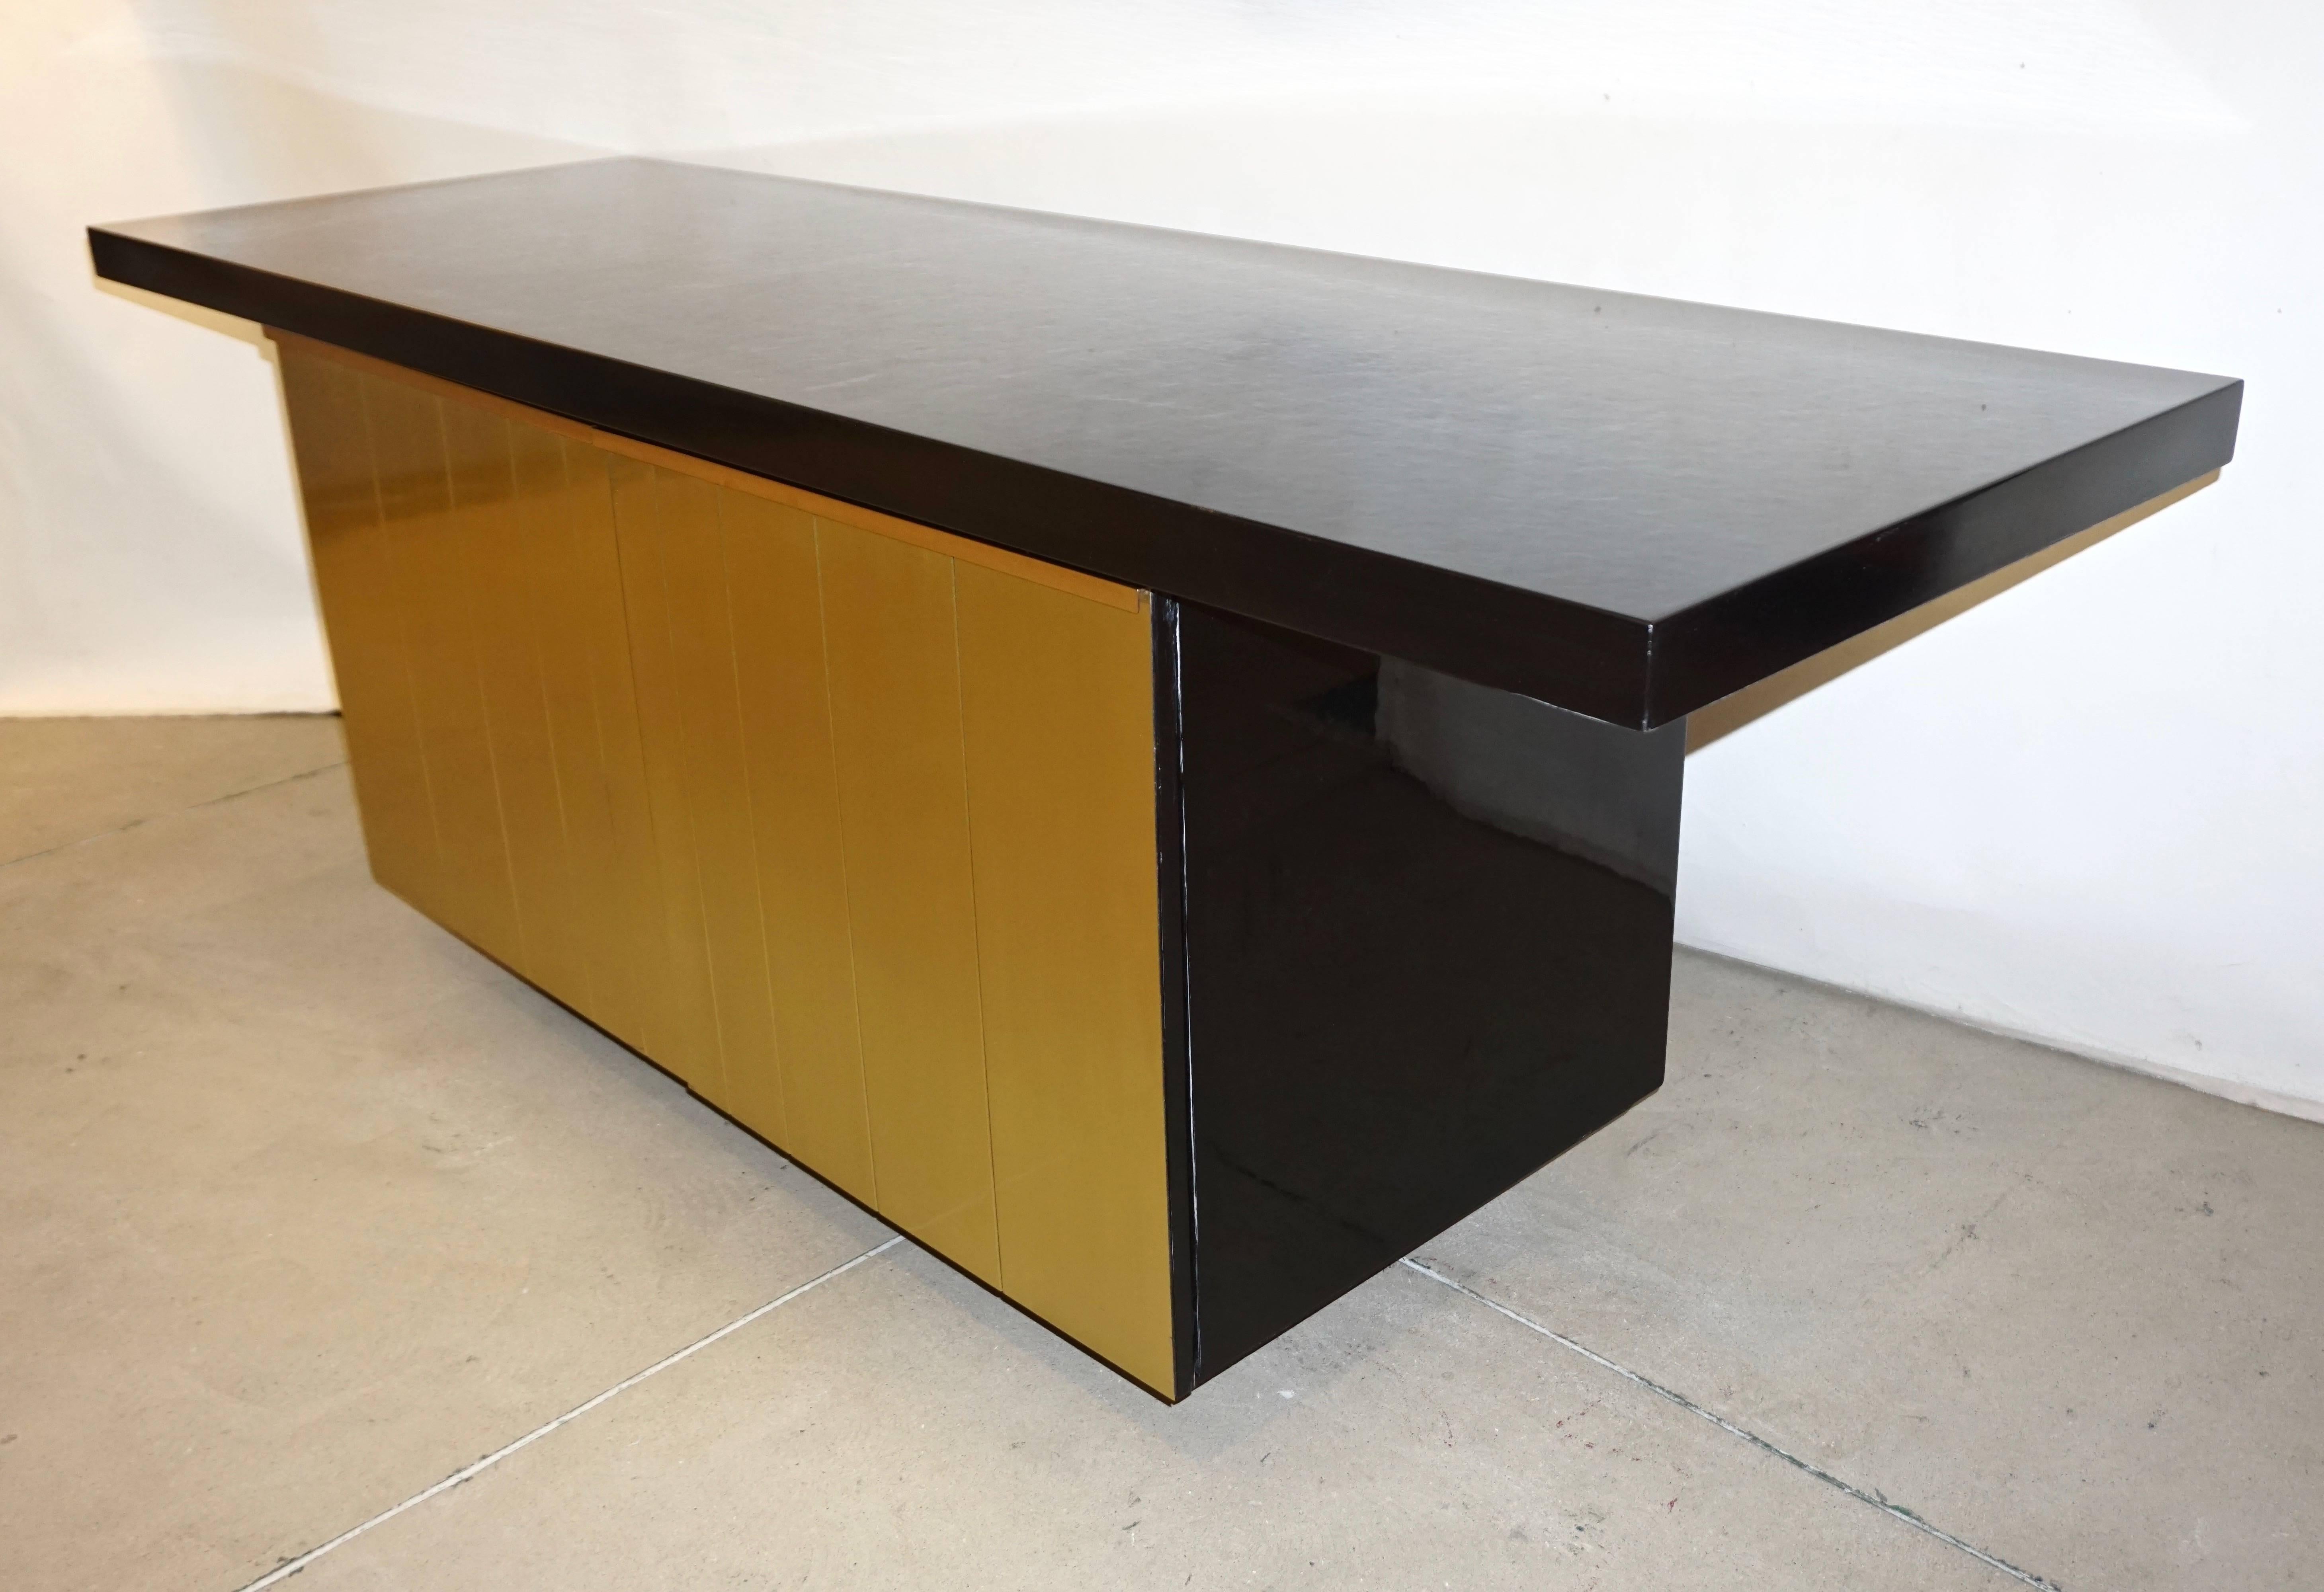 1970s Italian fine design black lacquered sideboard or cabinet, entirely handcrafted, a documented modern design: Vulcan by Aldo Frigerio for Gio' Frigerio (Desio - Milan). High quality of execution with an unusual front handcrafted in copper-brass